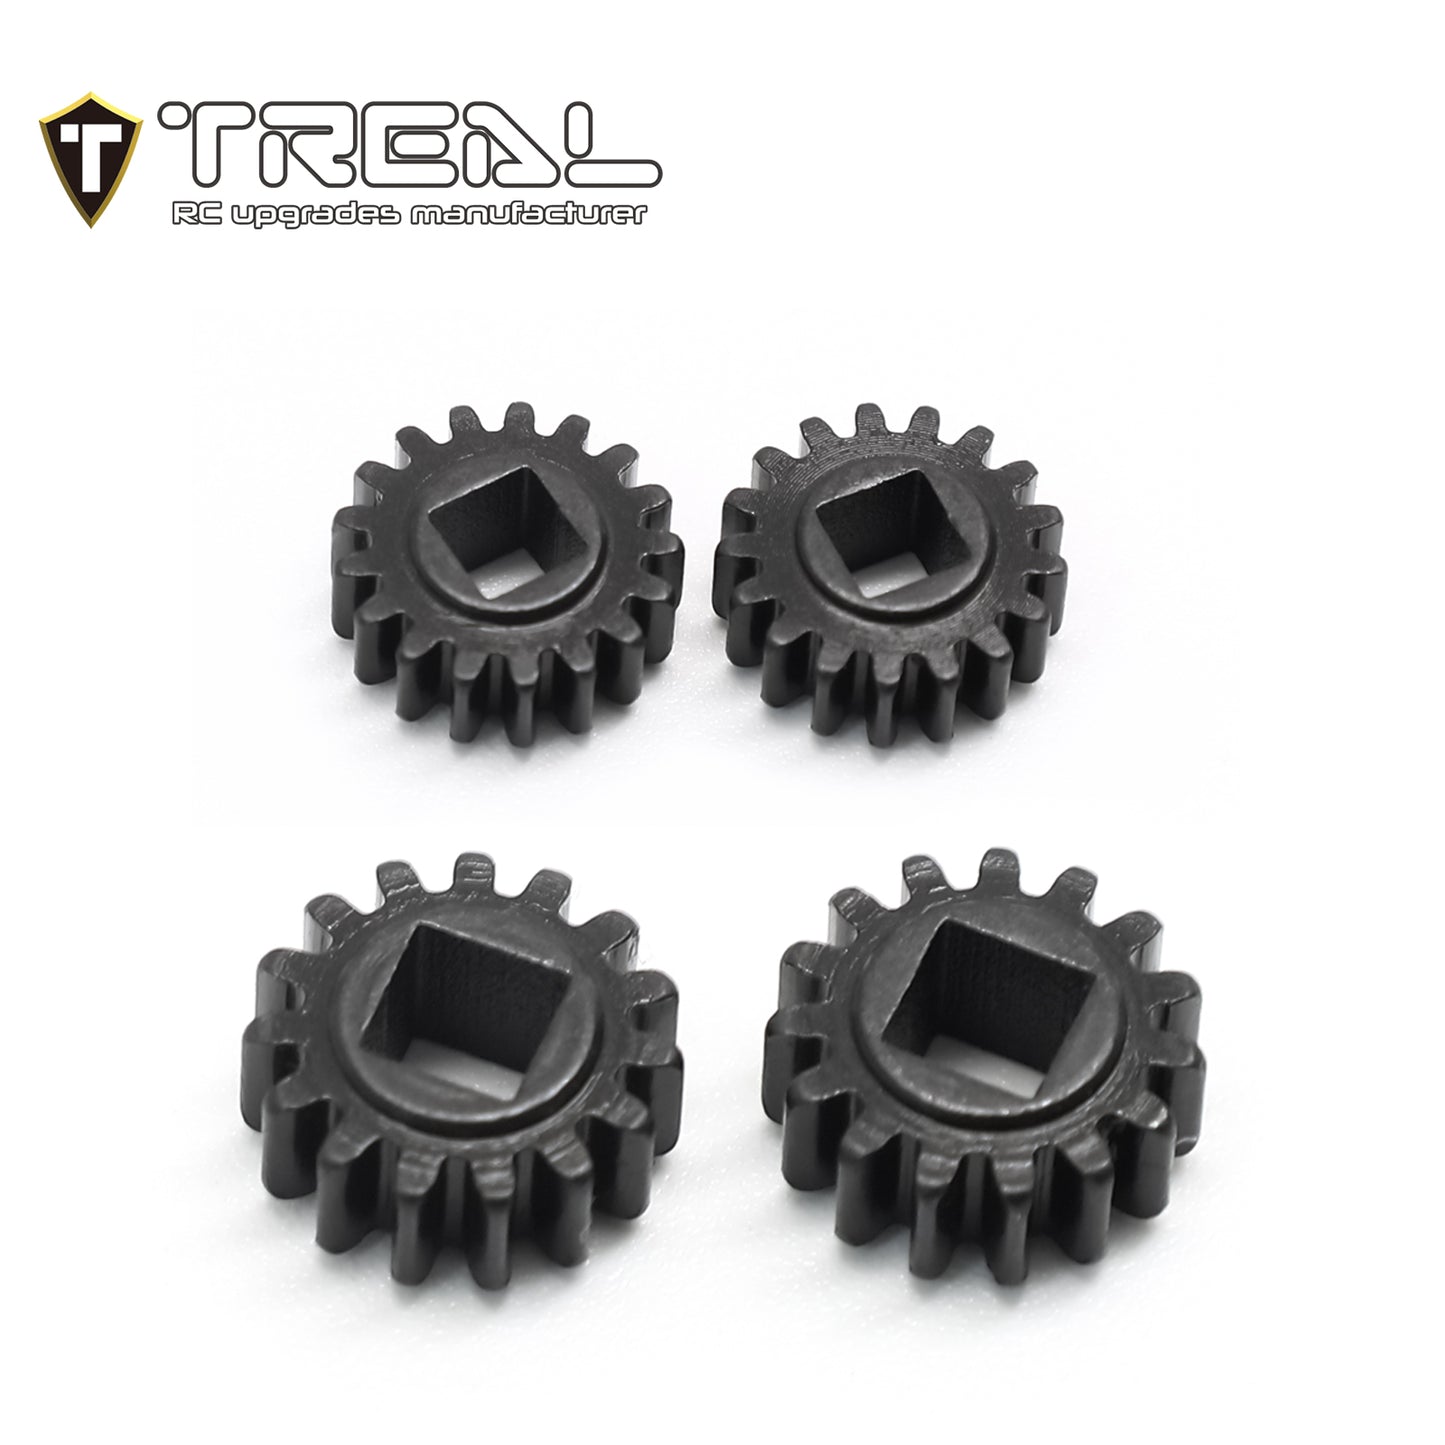 TREAL SCX24 Overdrive Portal Gears 15T/17T Harden Steel Gears Compatible with TREAL SCX24/TRX4M Portal Axles